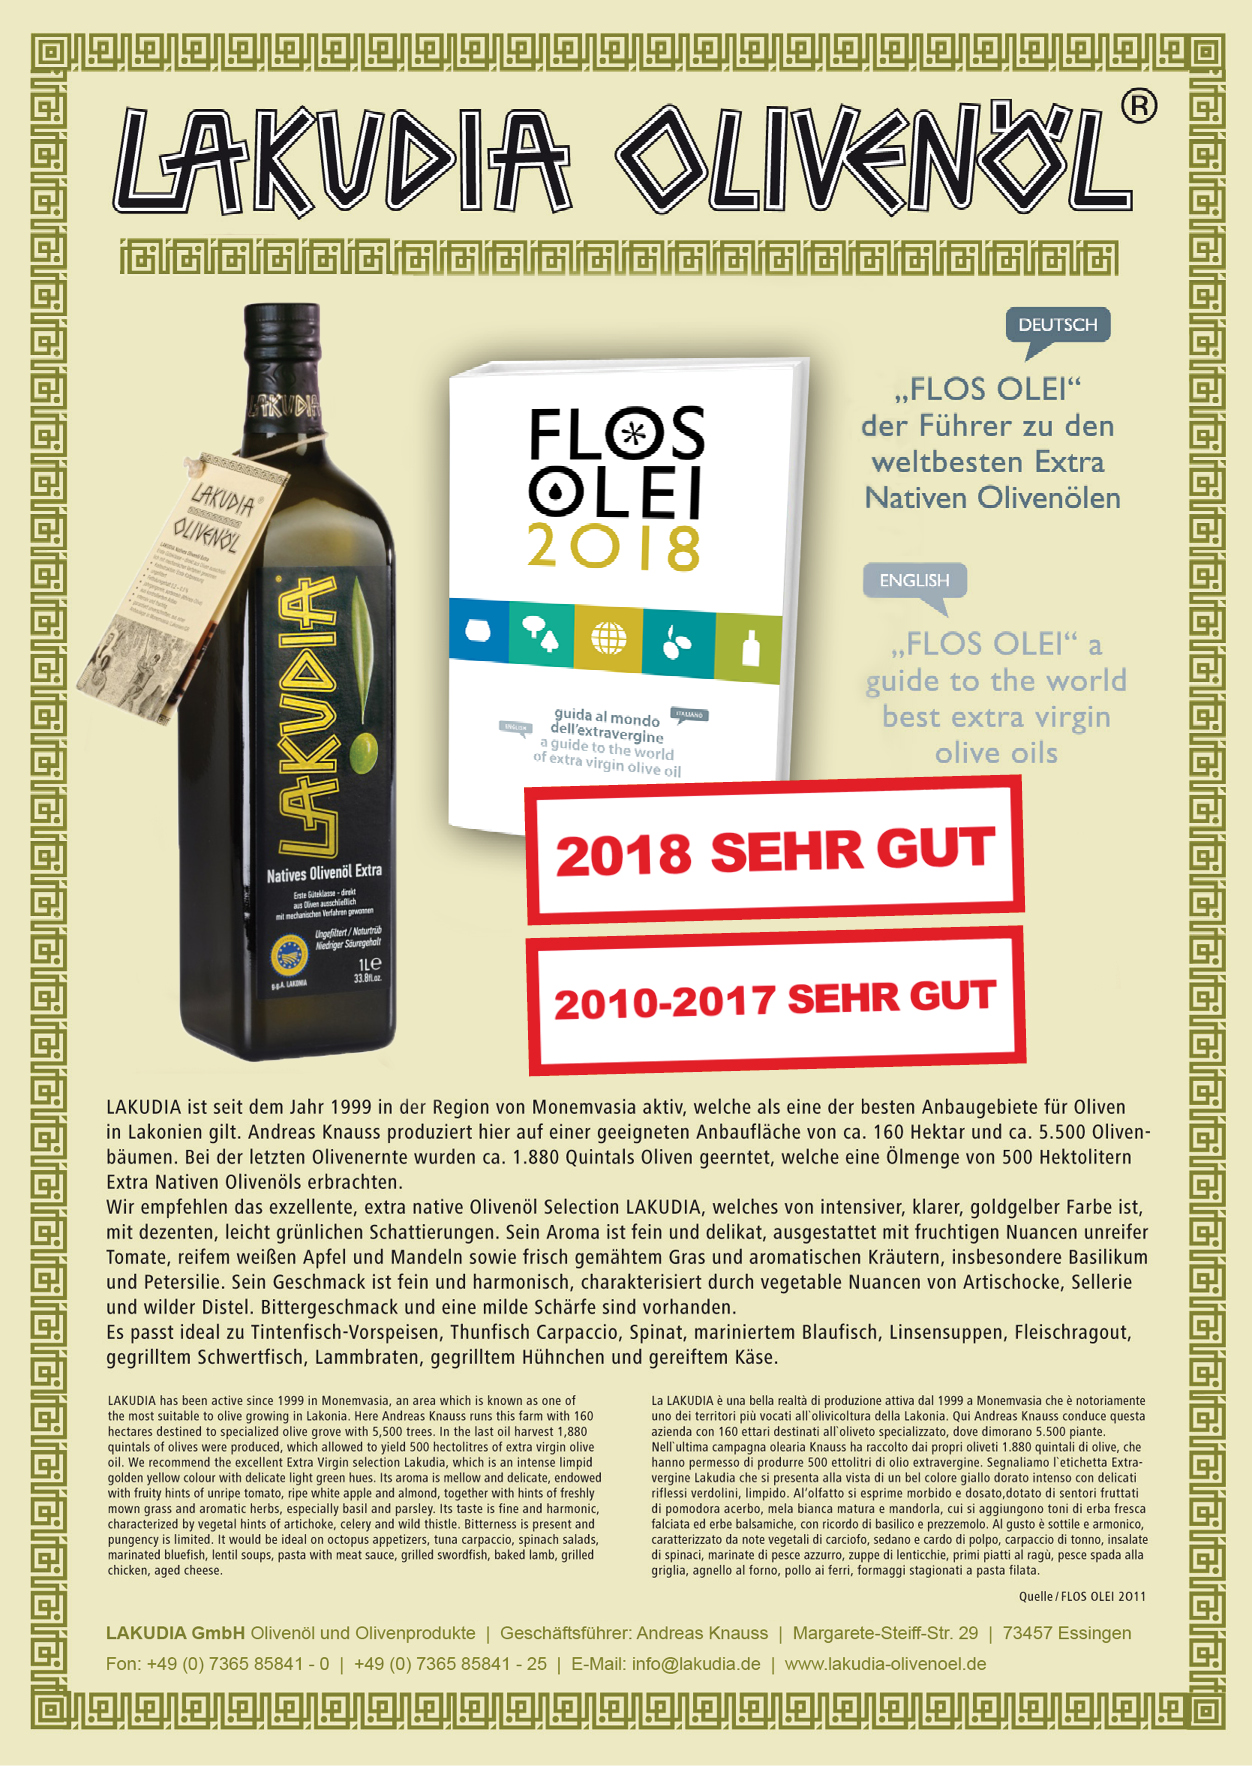 <strong>2018 FLOS OLEI: </strong><strong>Huile d'olive LAKUDIA primée</strong>